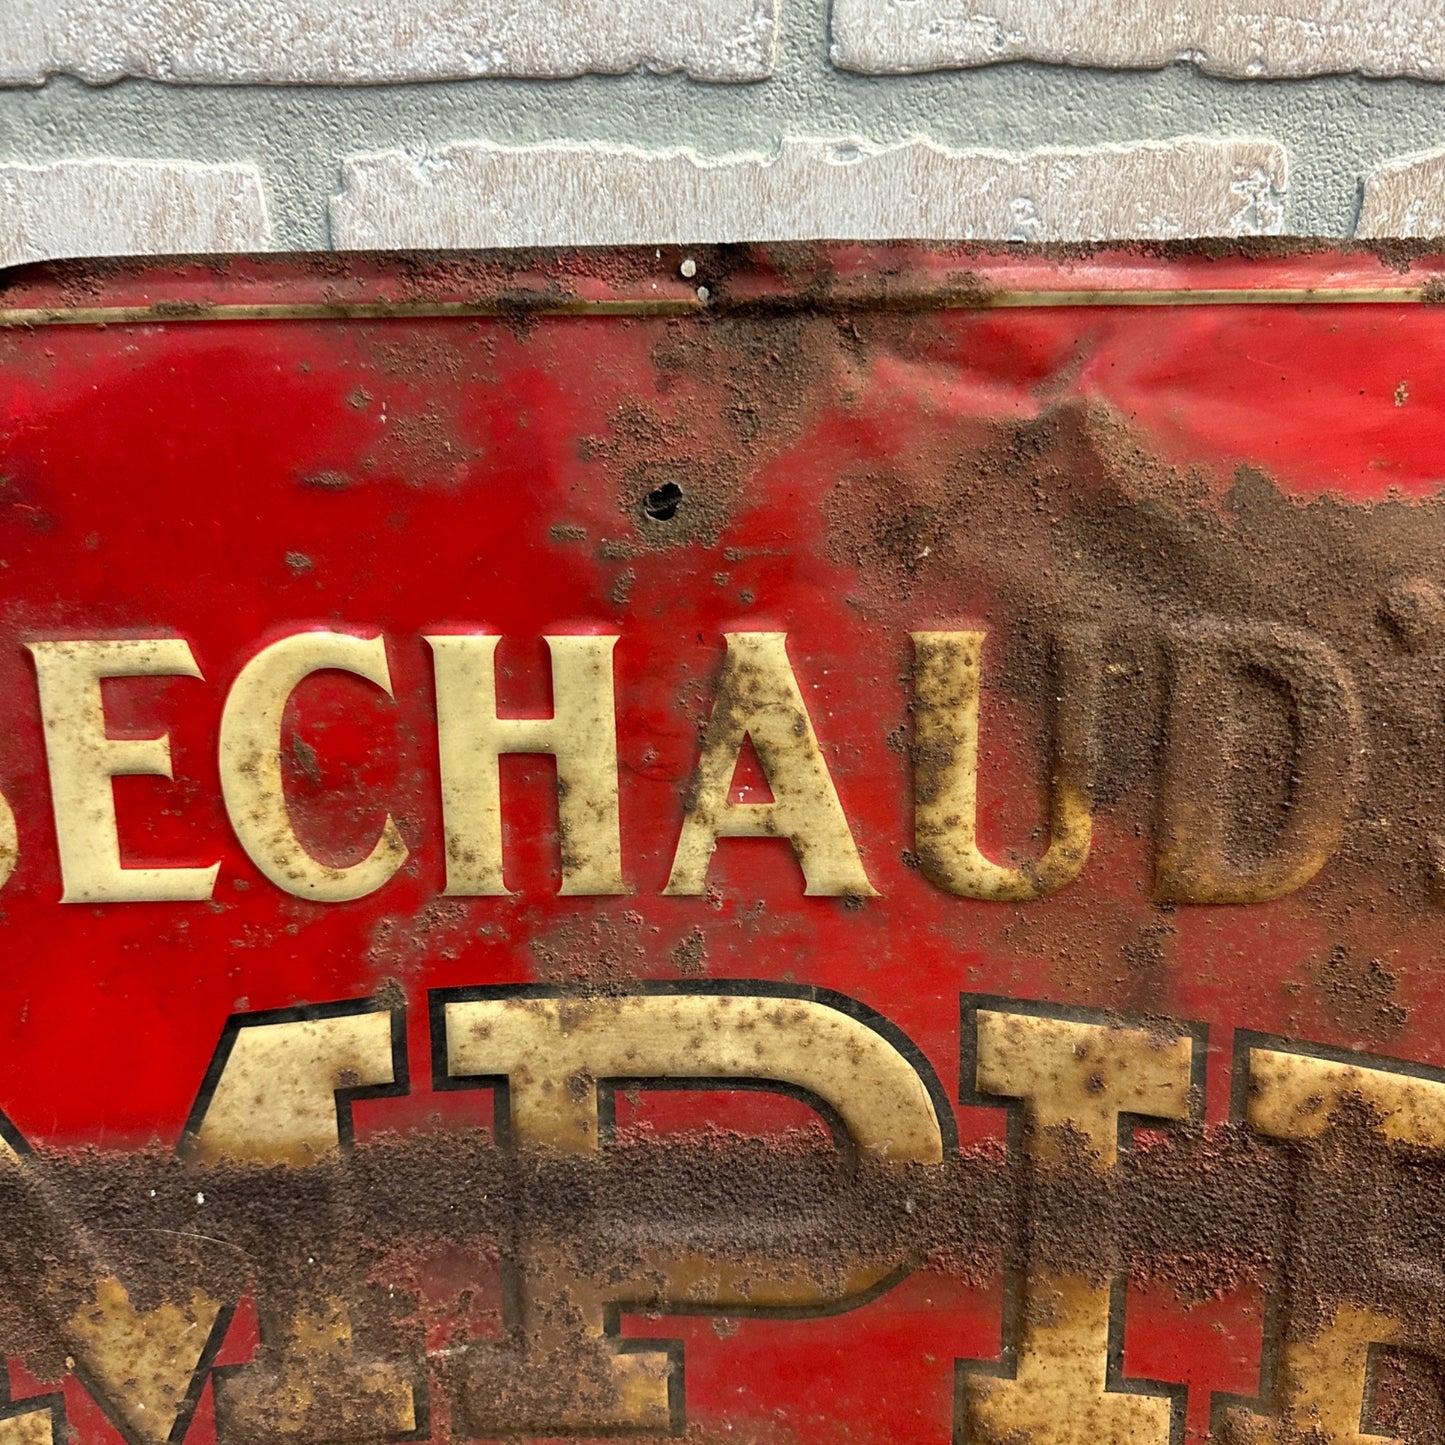 SCARCE Vintage Bechaud's Empire Beer Tin Advertising Sign Fond du Lac Wis